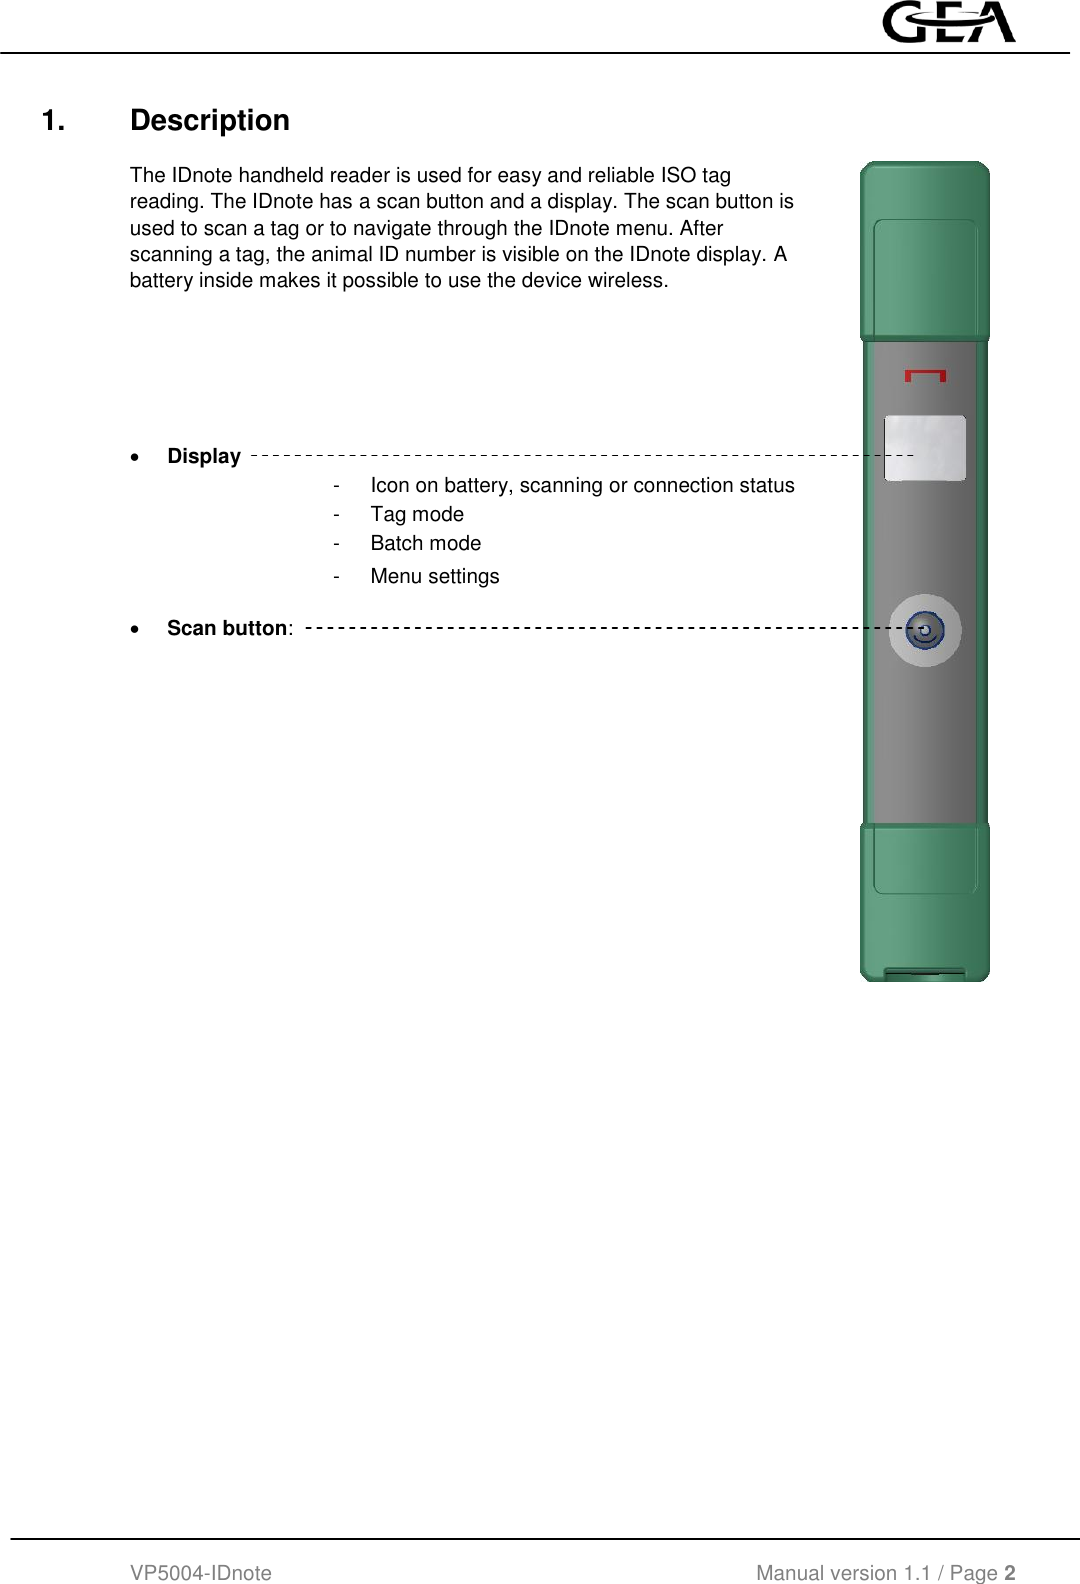  VP5004-IDnote                                             Manual version 1.1 / Page 2  1.  Description  The IDnote handheld reader is used for easy and reliable ISO tag reading. The IDnote has a scan button and a display. The scan button is used to scan a tag or to navigate through the IDnote menu. After scanning a tag, the animal ID number is visible on the IDnote display. A battery inside makes it possible to use the device wireless.          Display      -  Icon on battery, scanning or connection status -  Tag mode -  Batch mode -  Menu settings  Scan button:            